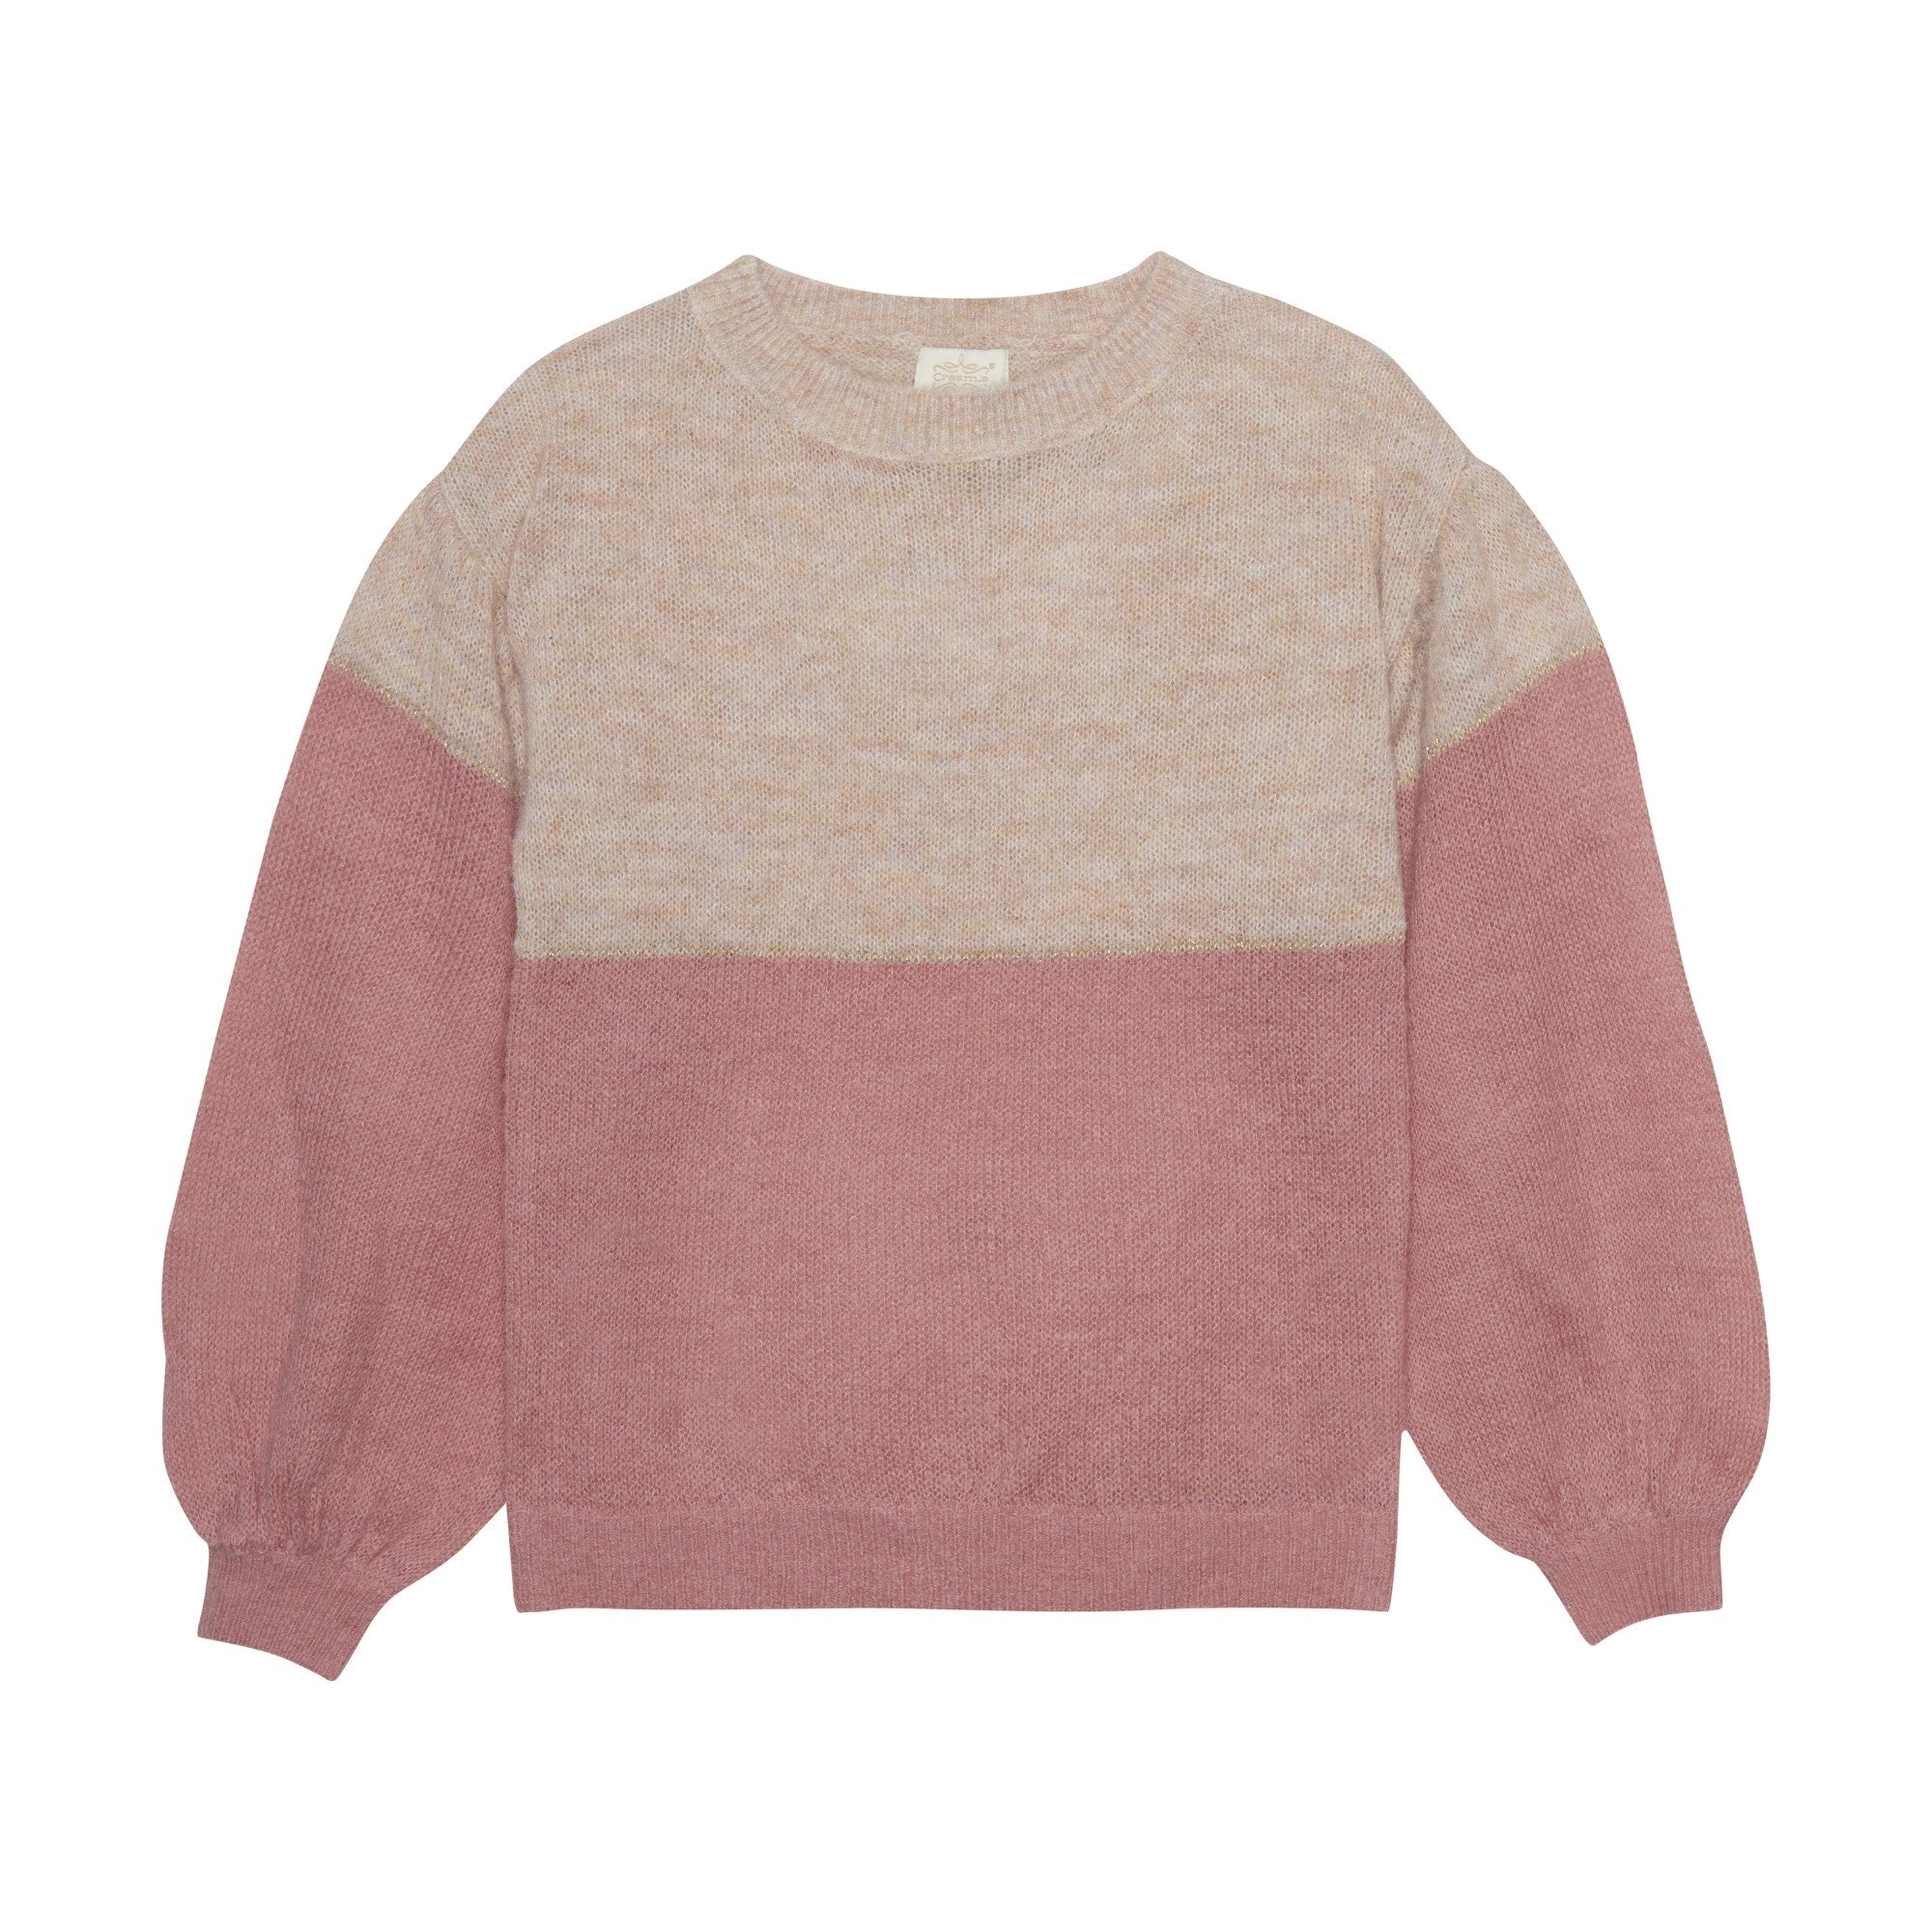 Two Color Knit Sweater